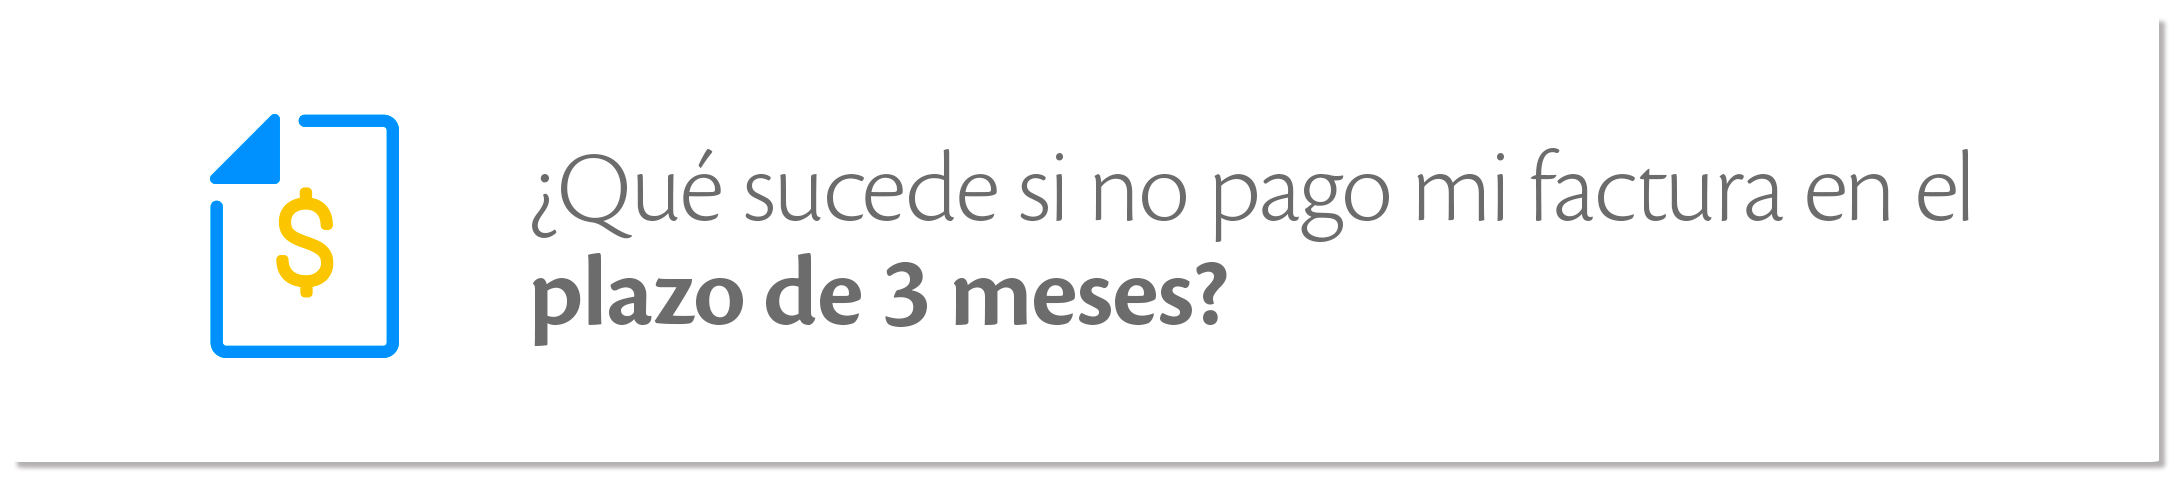 aw-que_sucede_si_no_pago_mi_factura_ftth.png